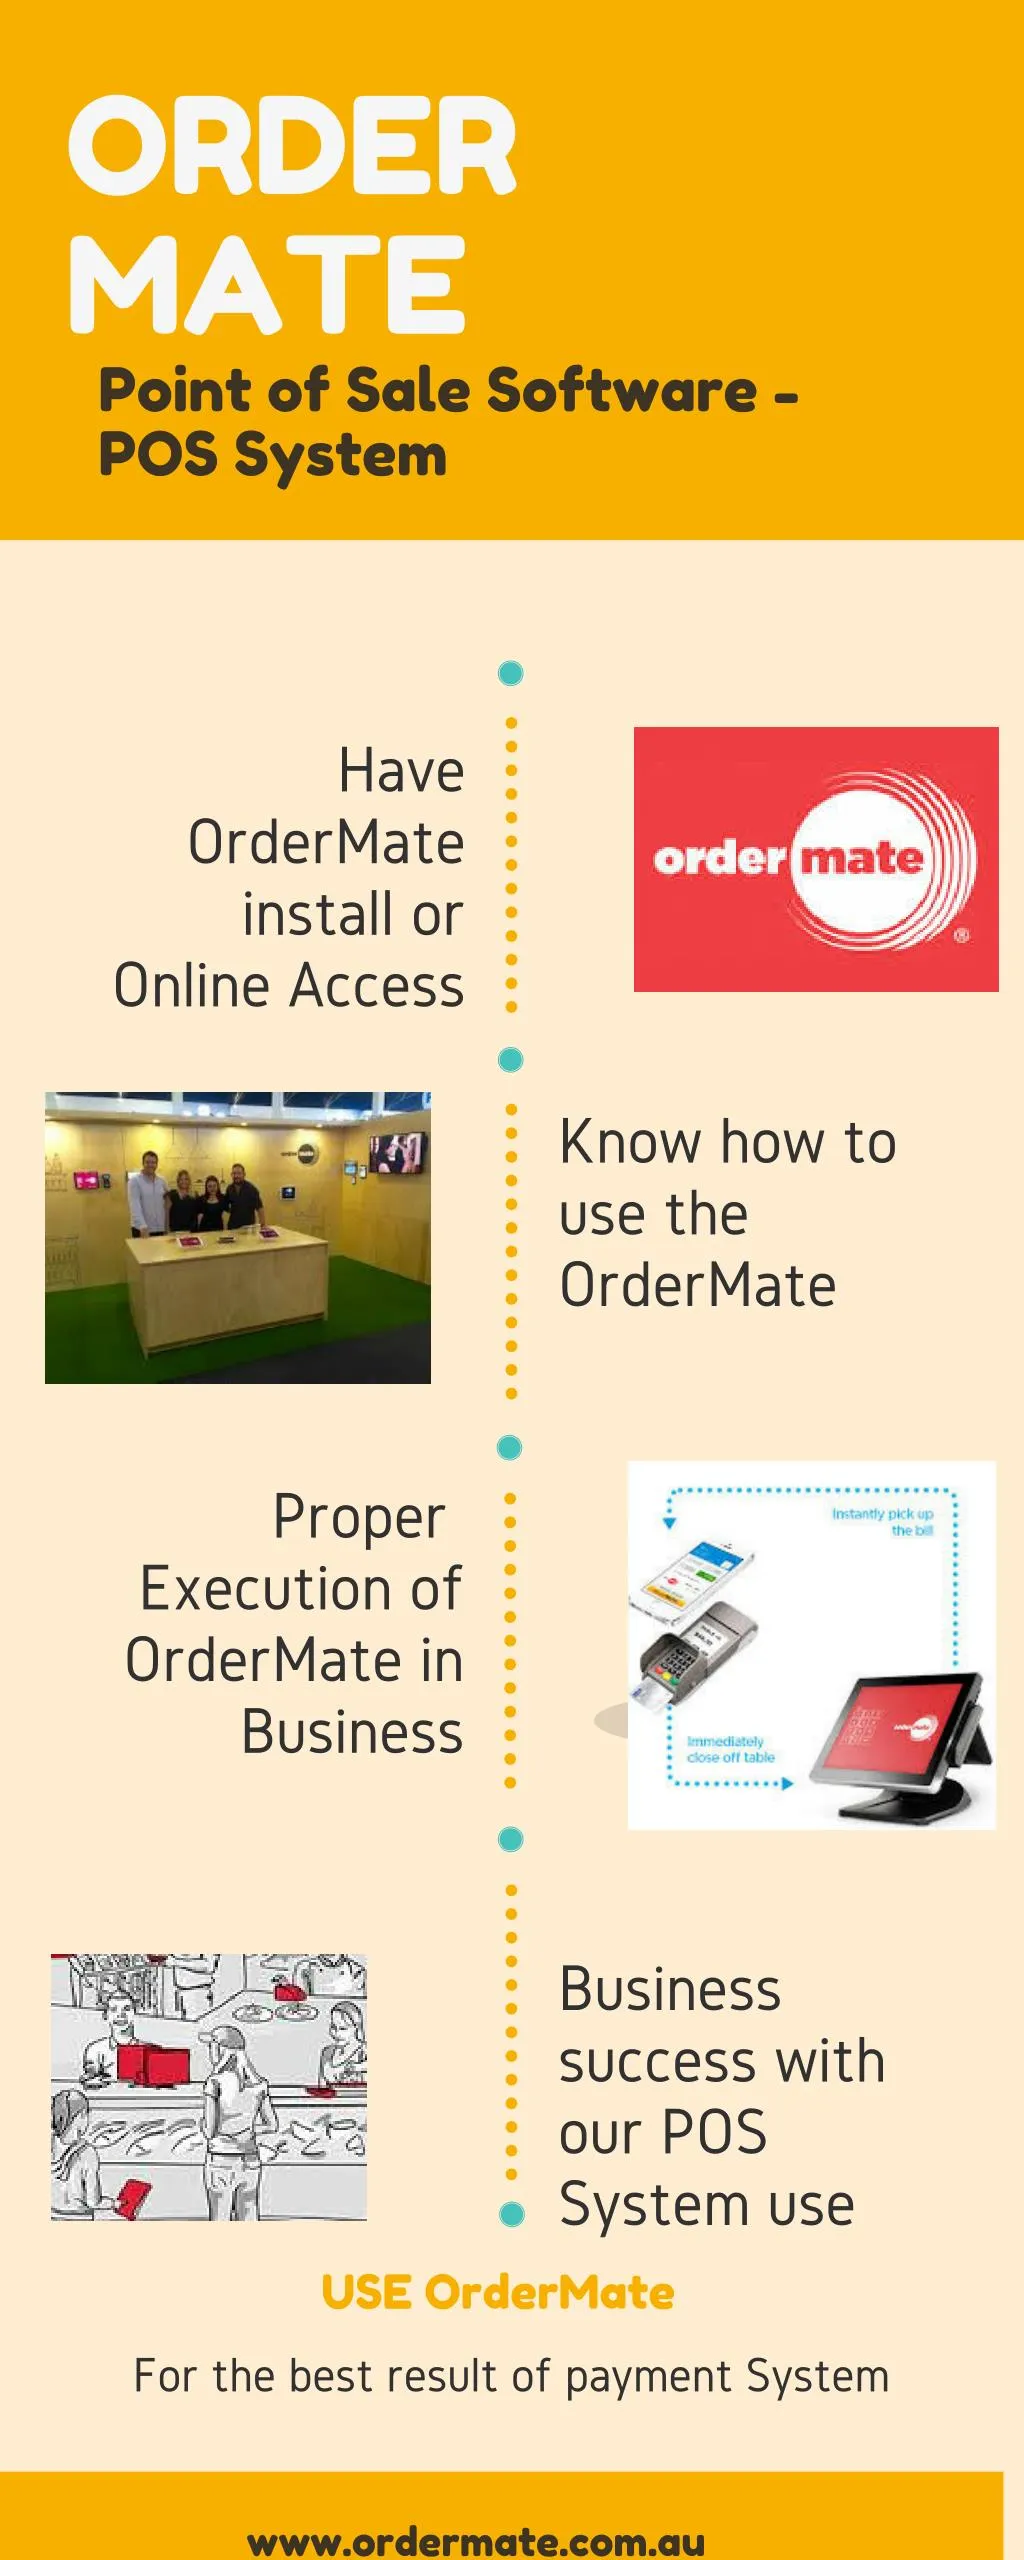 order mate point of sale software pos system